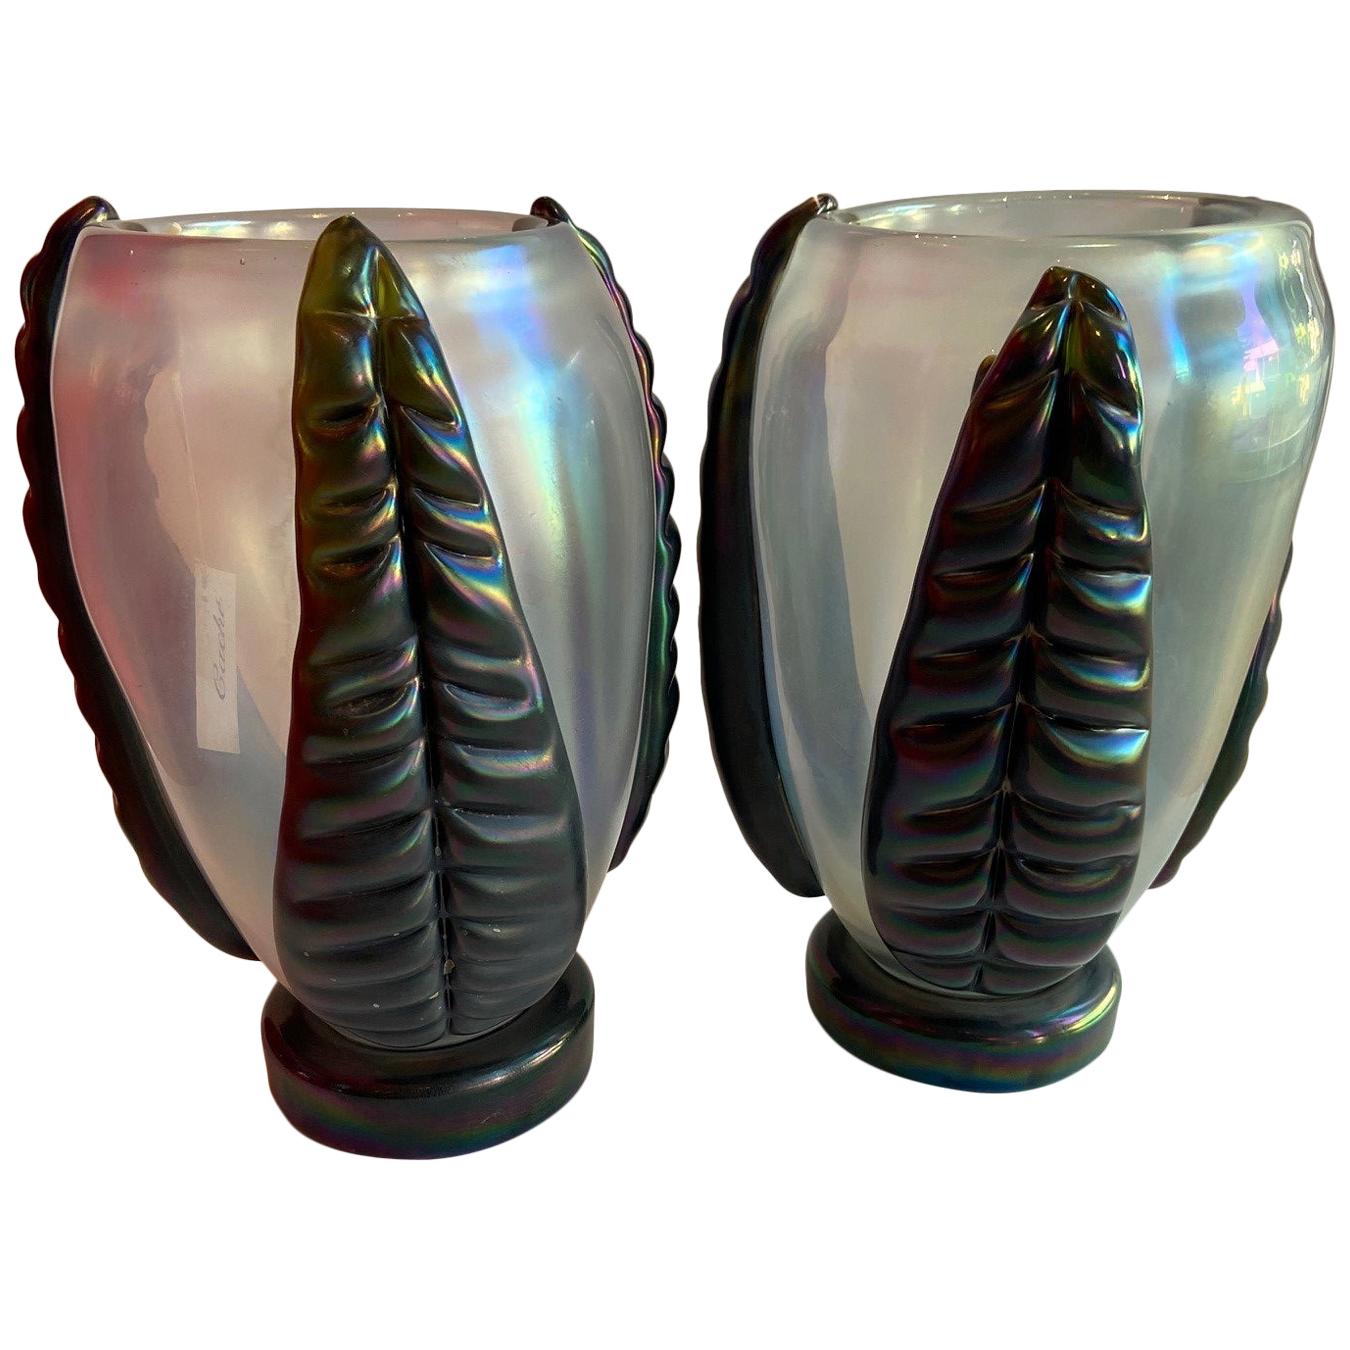 Pair of Sculpture Iridescent Murano Glass Vases Signed by Costantini